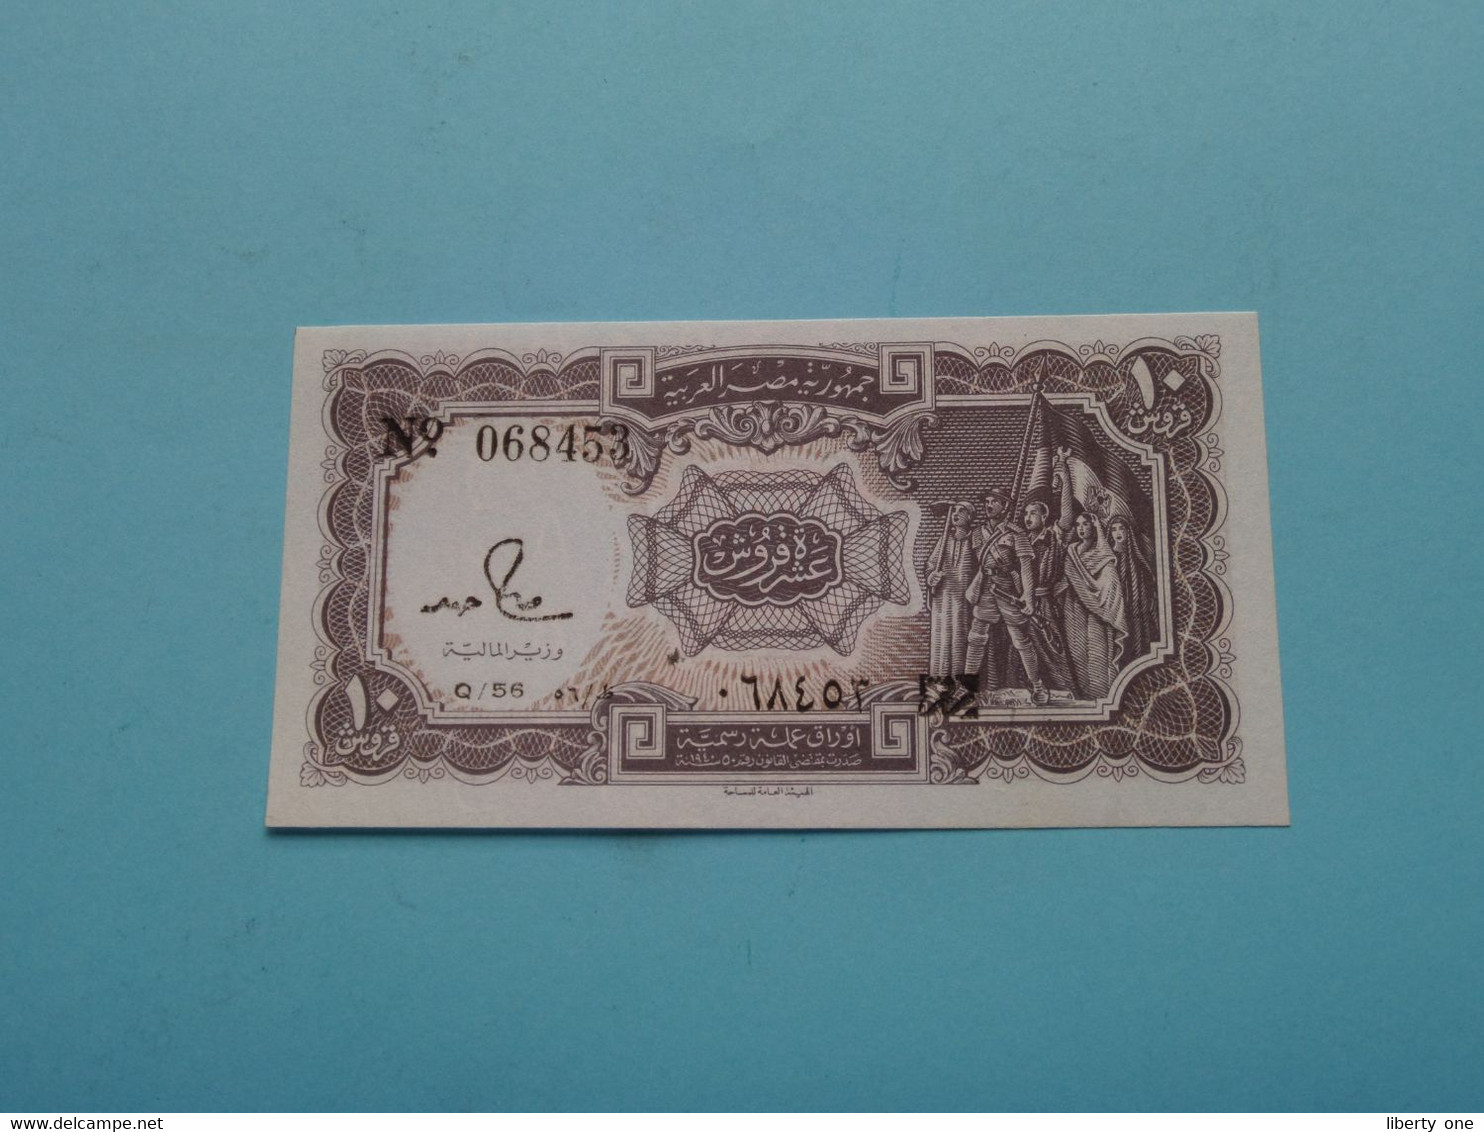 10 Piastres ( N° 068453 ) The Arab Republic Of EGYPT - Q 56 ( Voir / See > Scans ) UNC ! - Aegypten